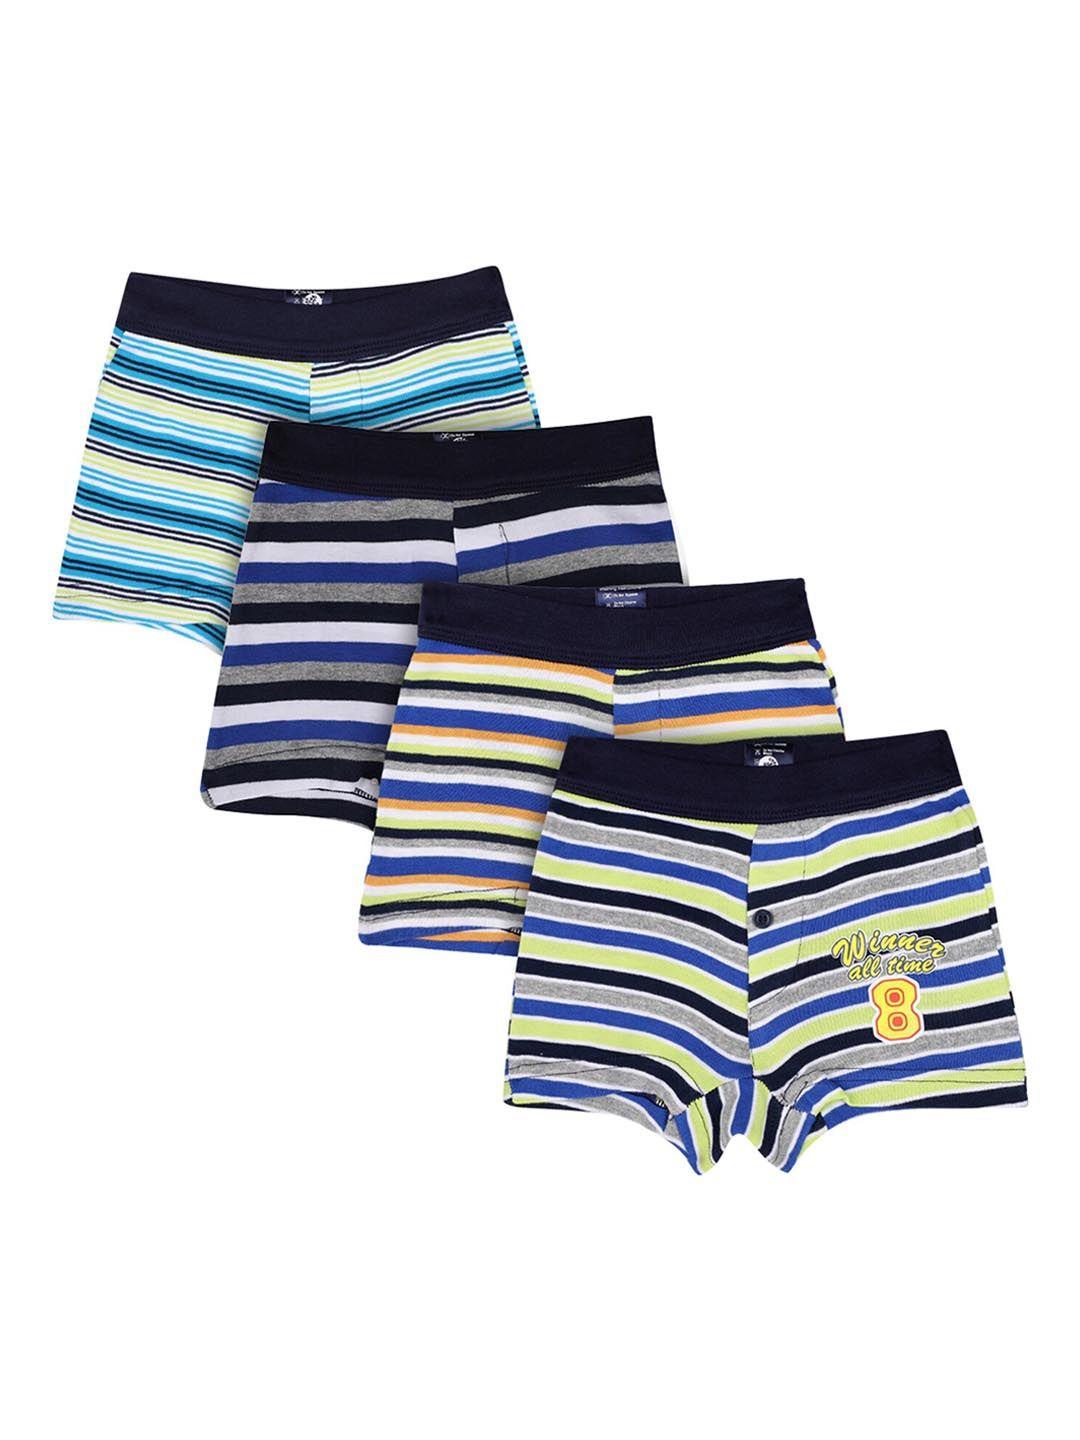 bodycare-kids-boys-pack-of-4-assorted-blue-striped-cotton-trunks